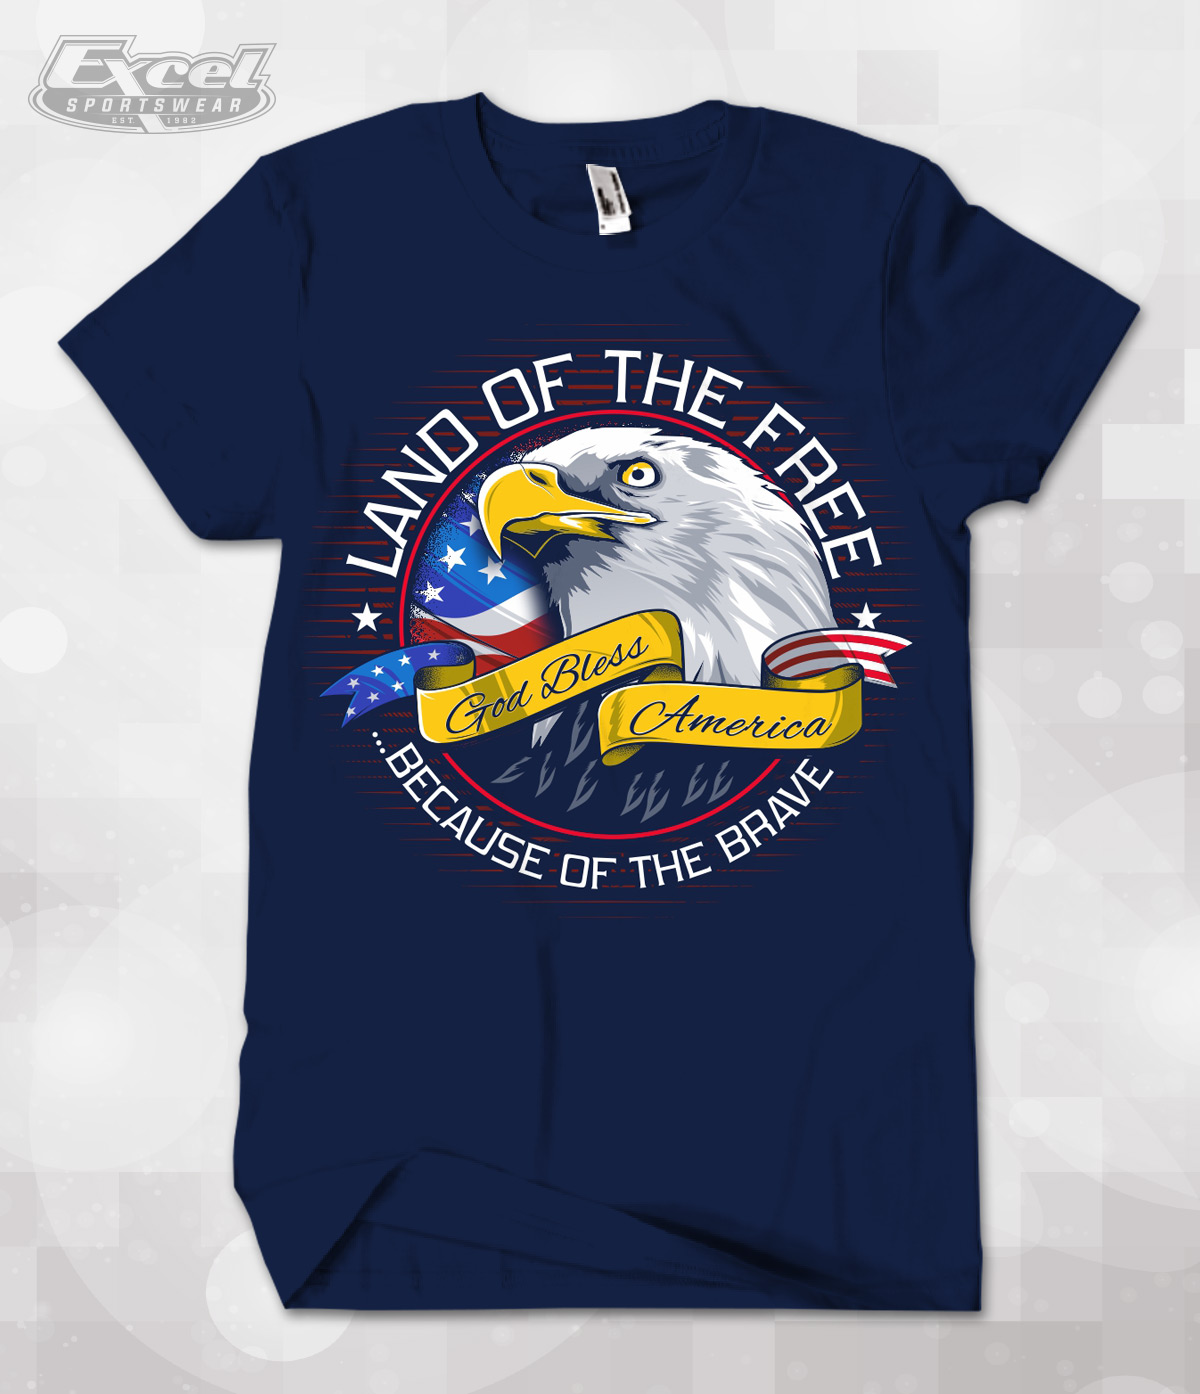 Patriot Series, Because of the Brave, 2019 Memorial Day Shirt by Excel Sportswear